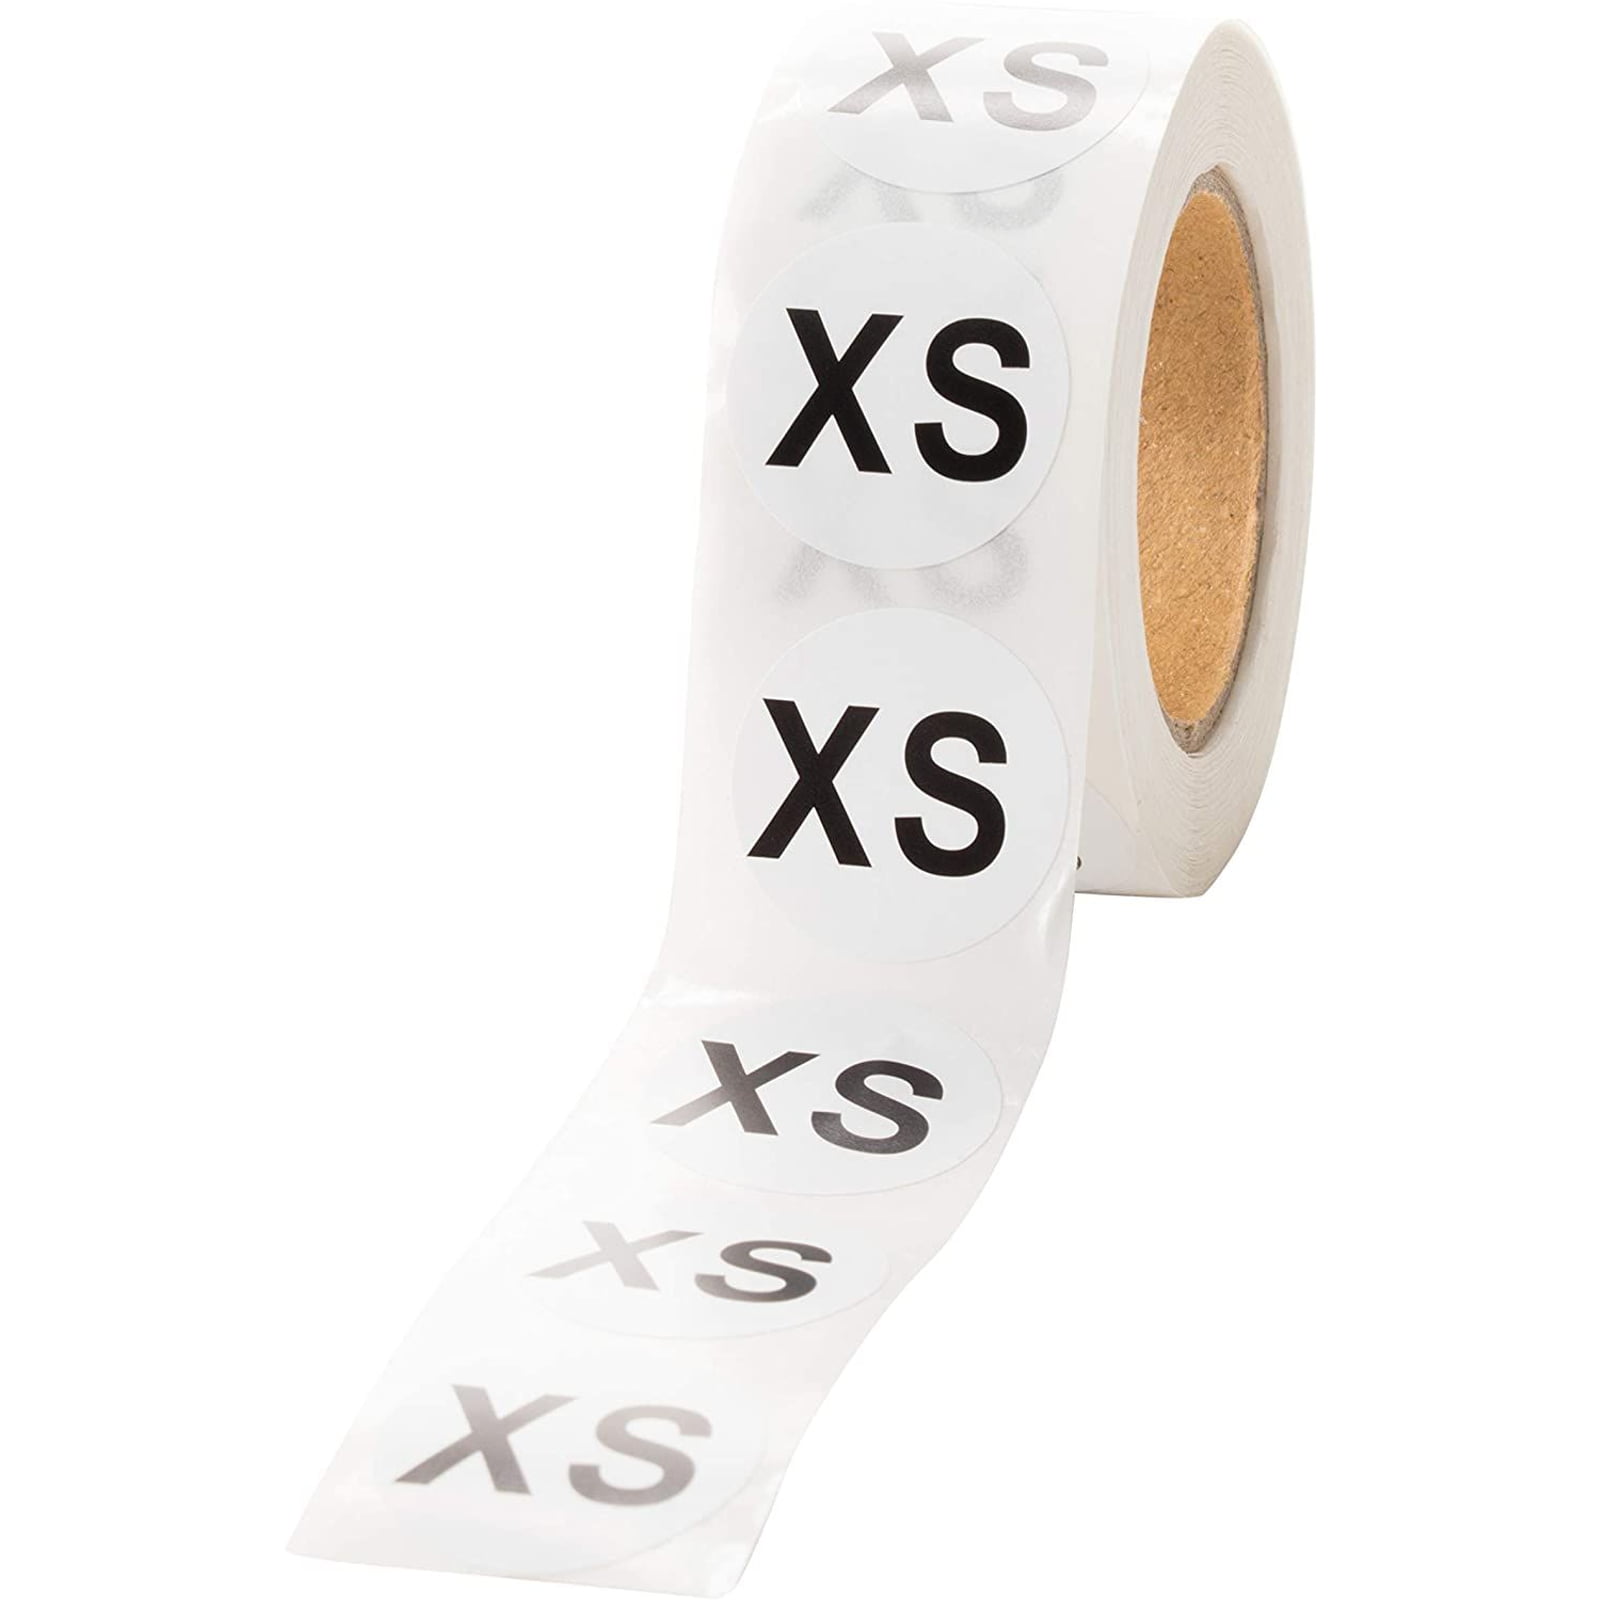 10Pcs Self-adhesive Clothing Size Stickers For Garment tags Label Retail Display 